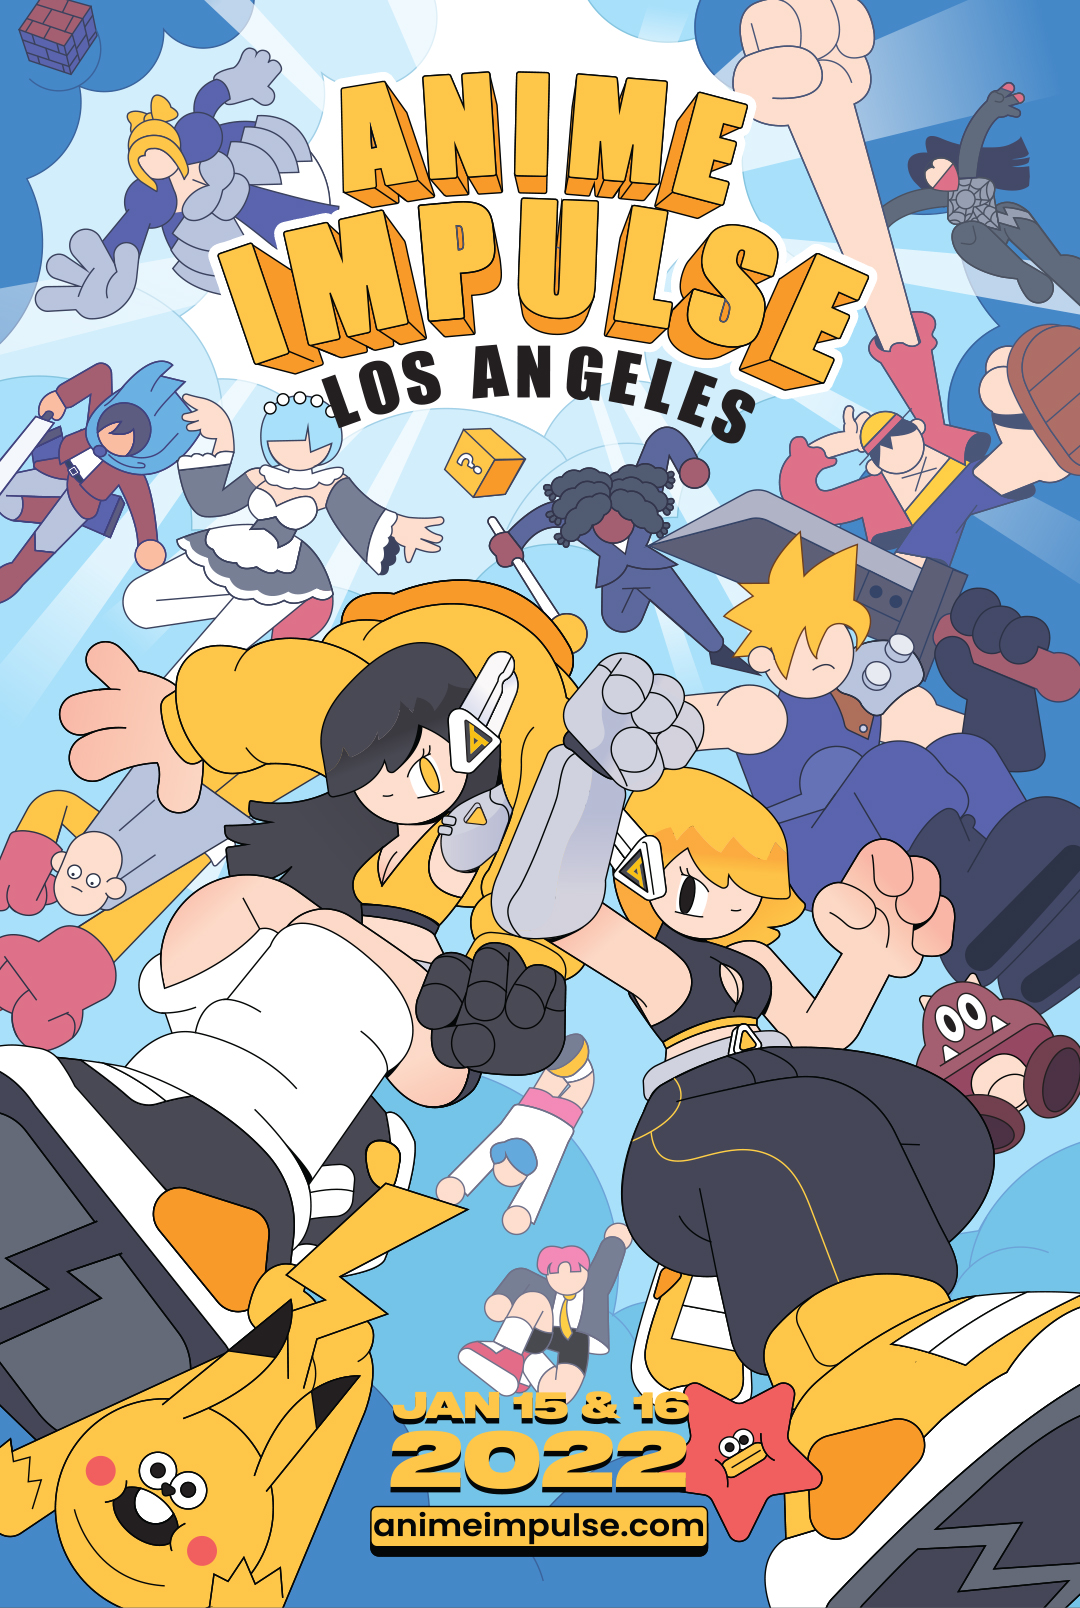 Anime Expo 2022 Japanese Pop Culture Celebration Returns to Los Angeles   LaughingPlacecom